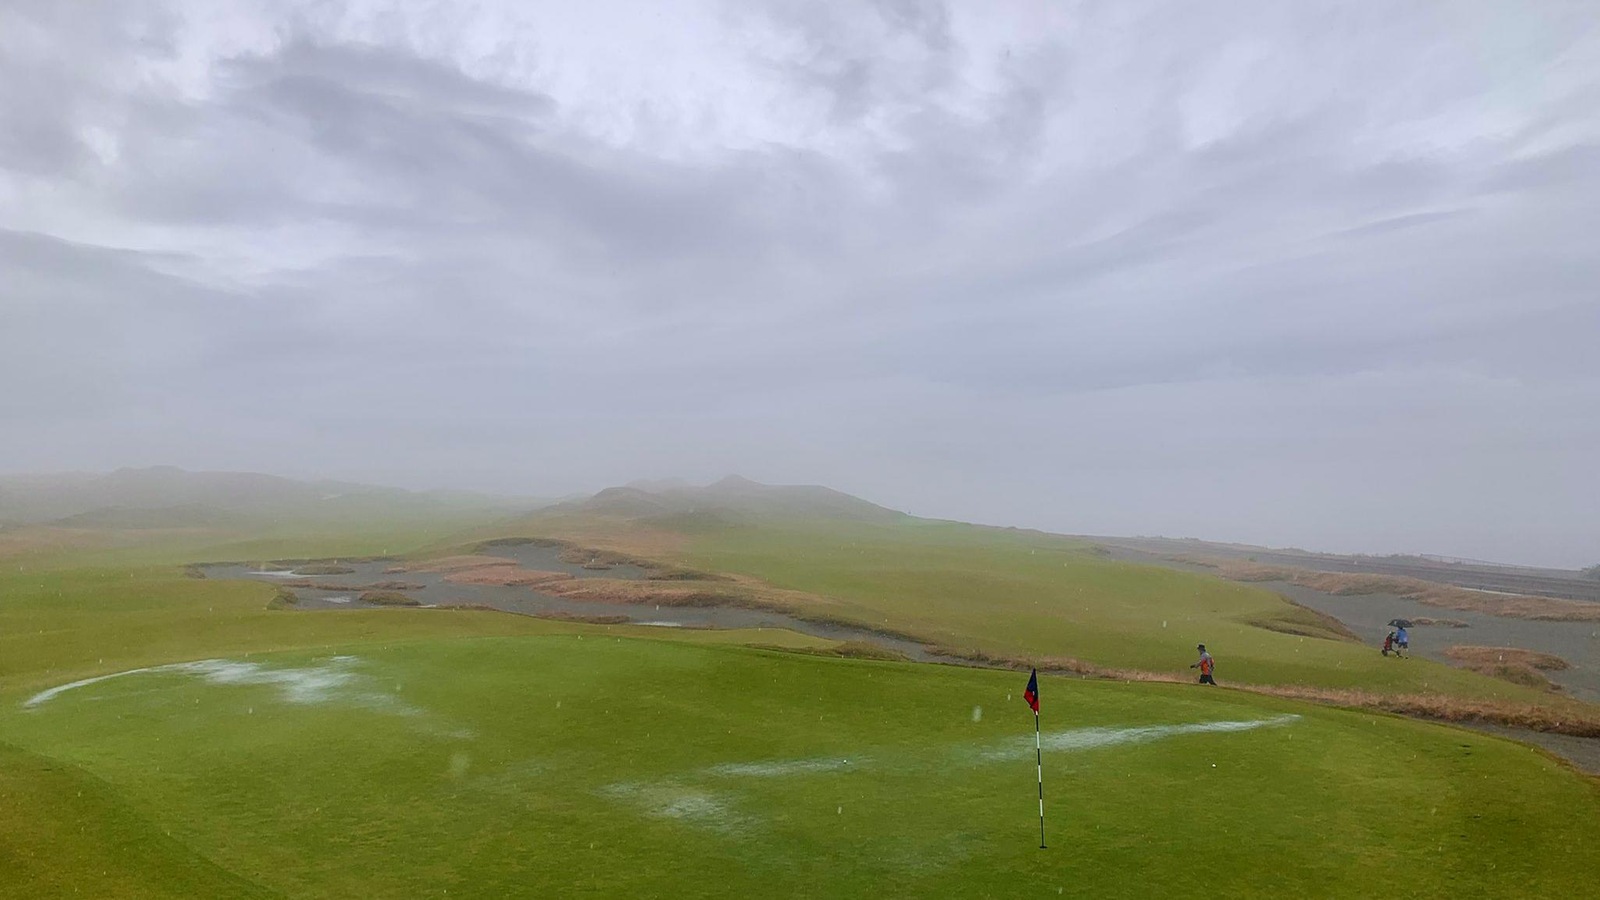 Opening two rounds of Seattle’s Redhawk Invitational canceled due to unsafe weather